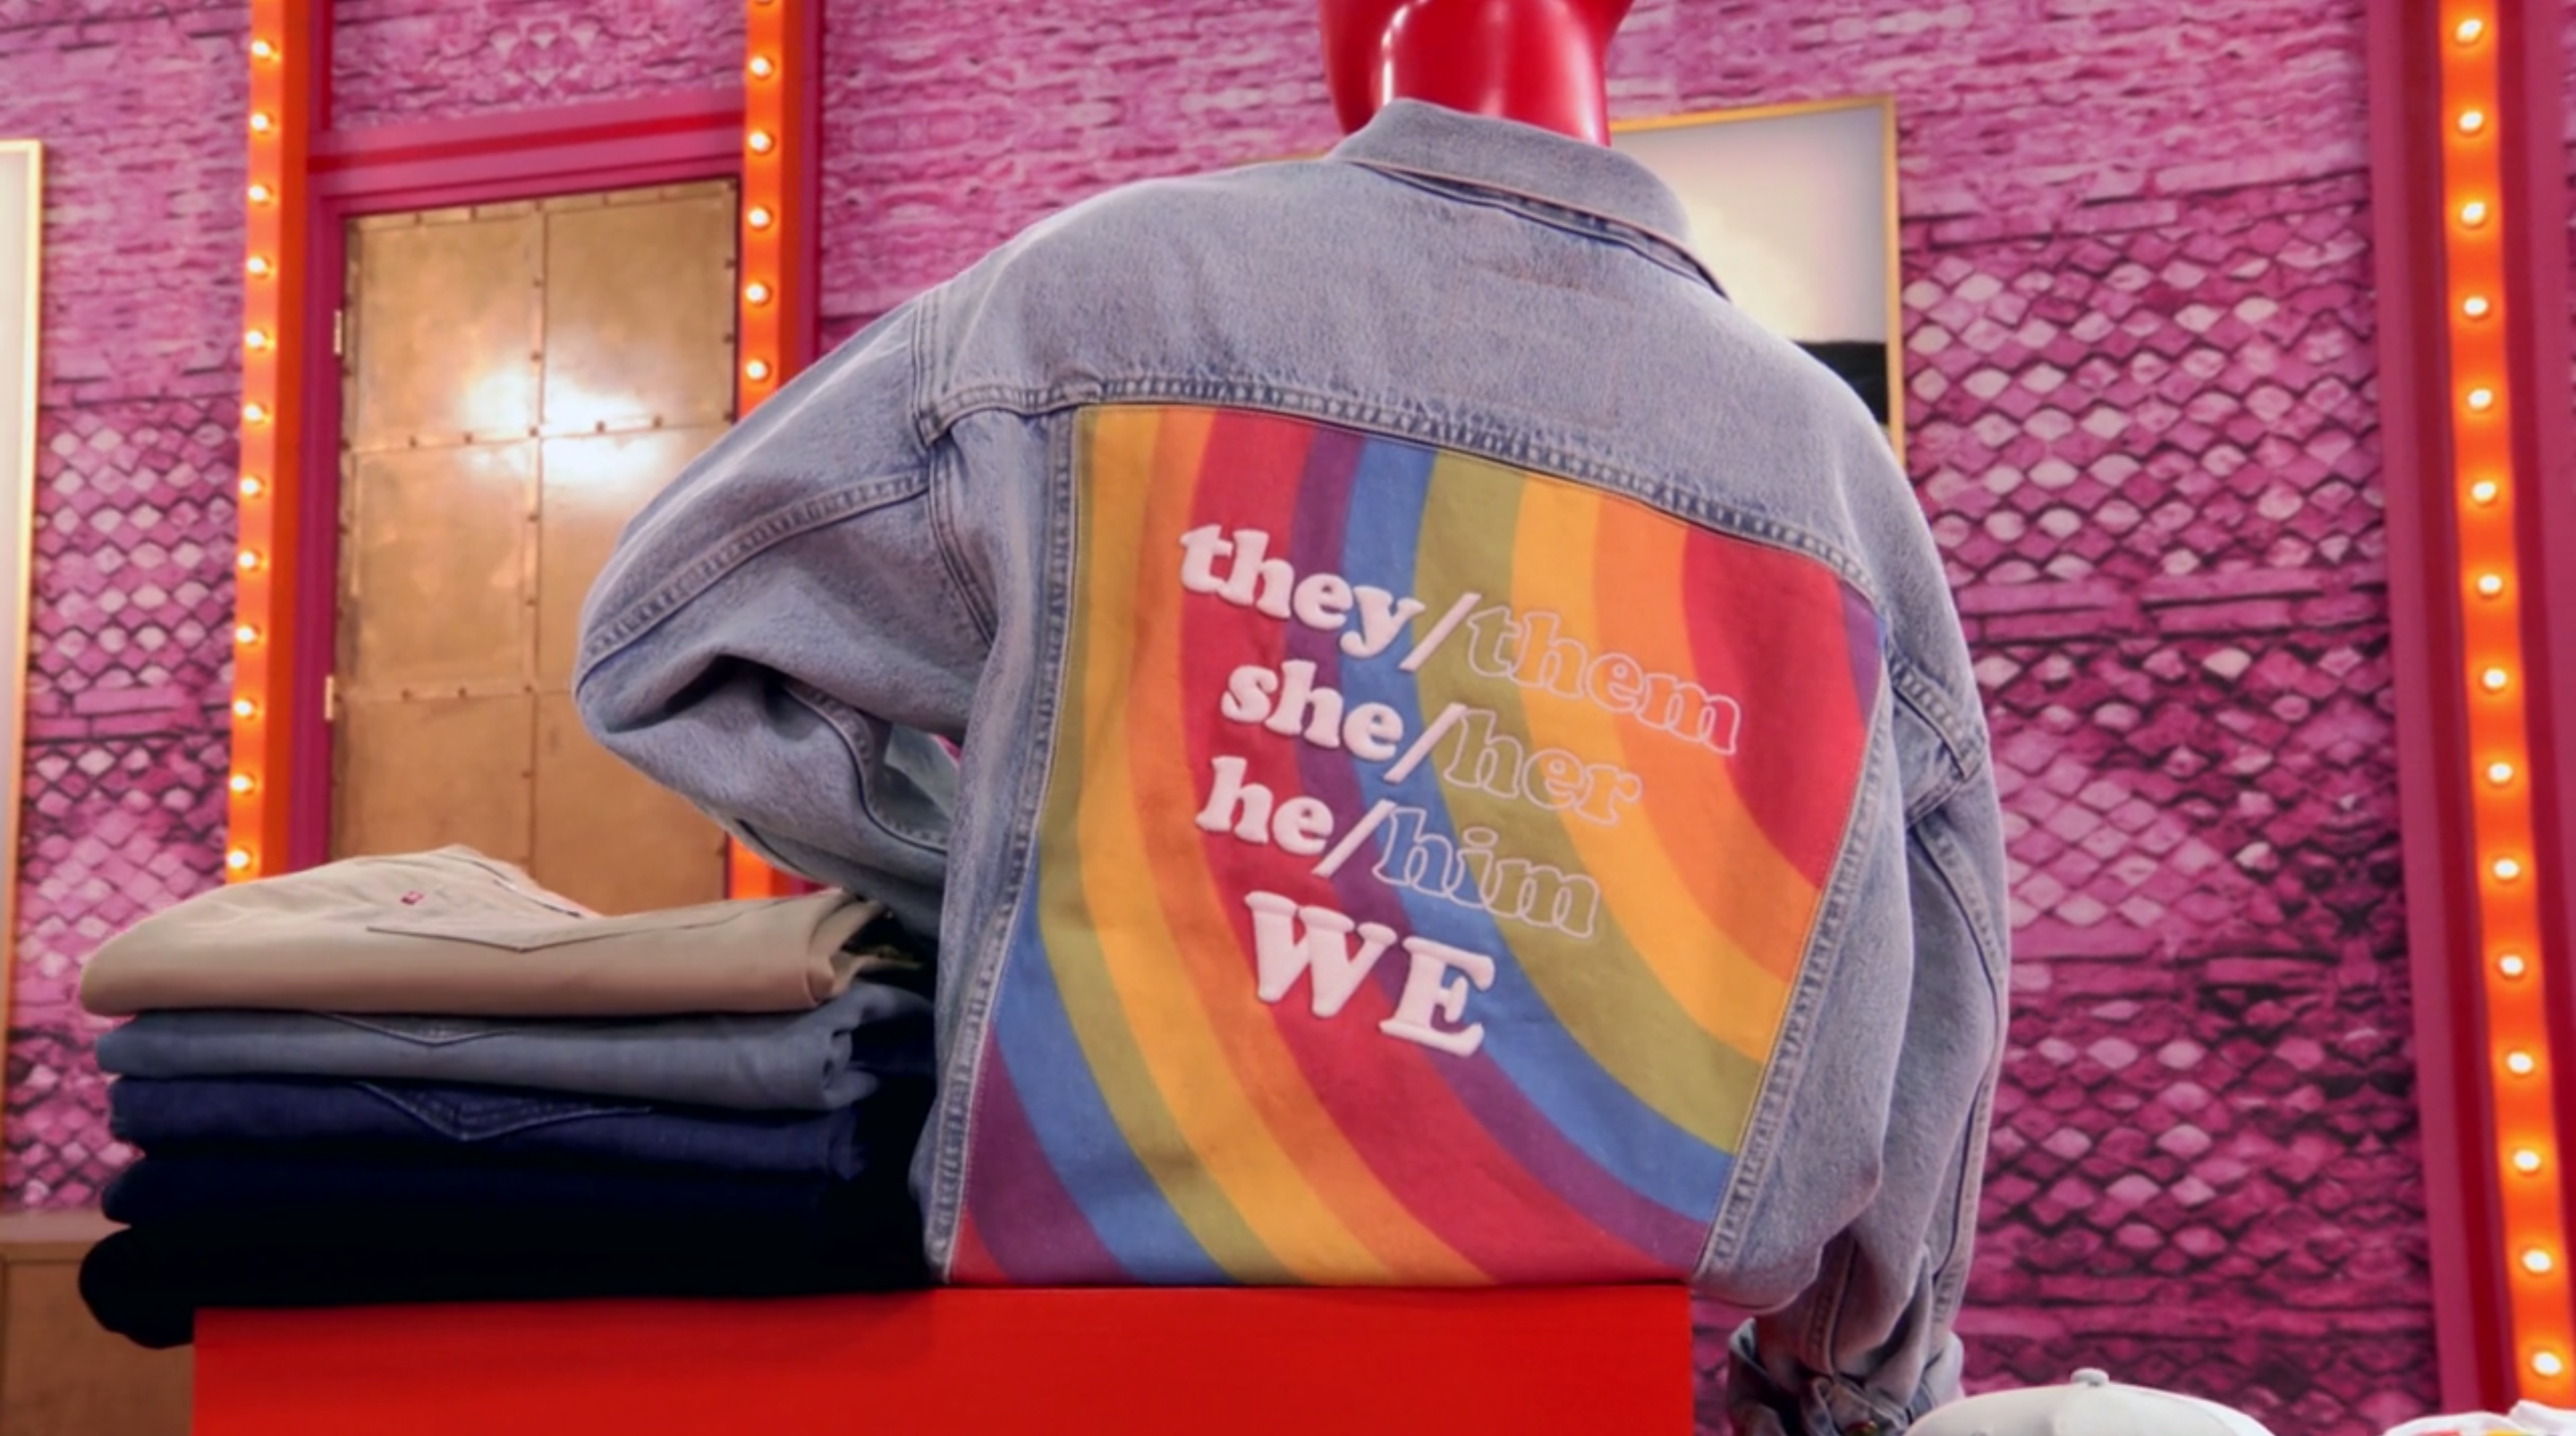 A jacket reading "they/them, she/her, he/him, WE."